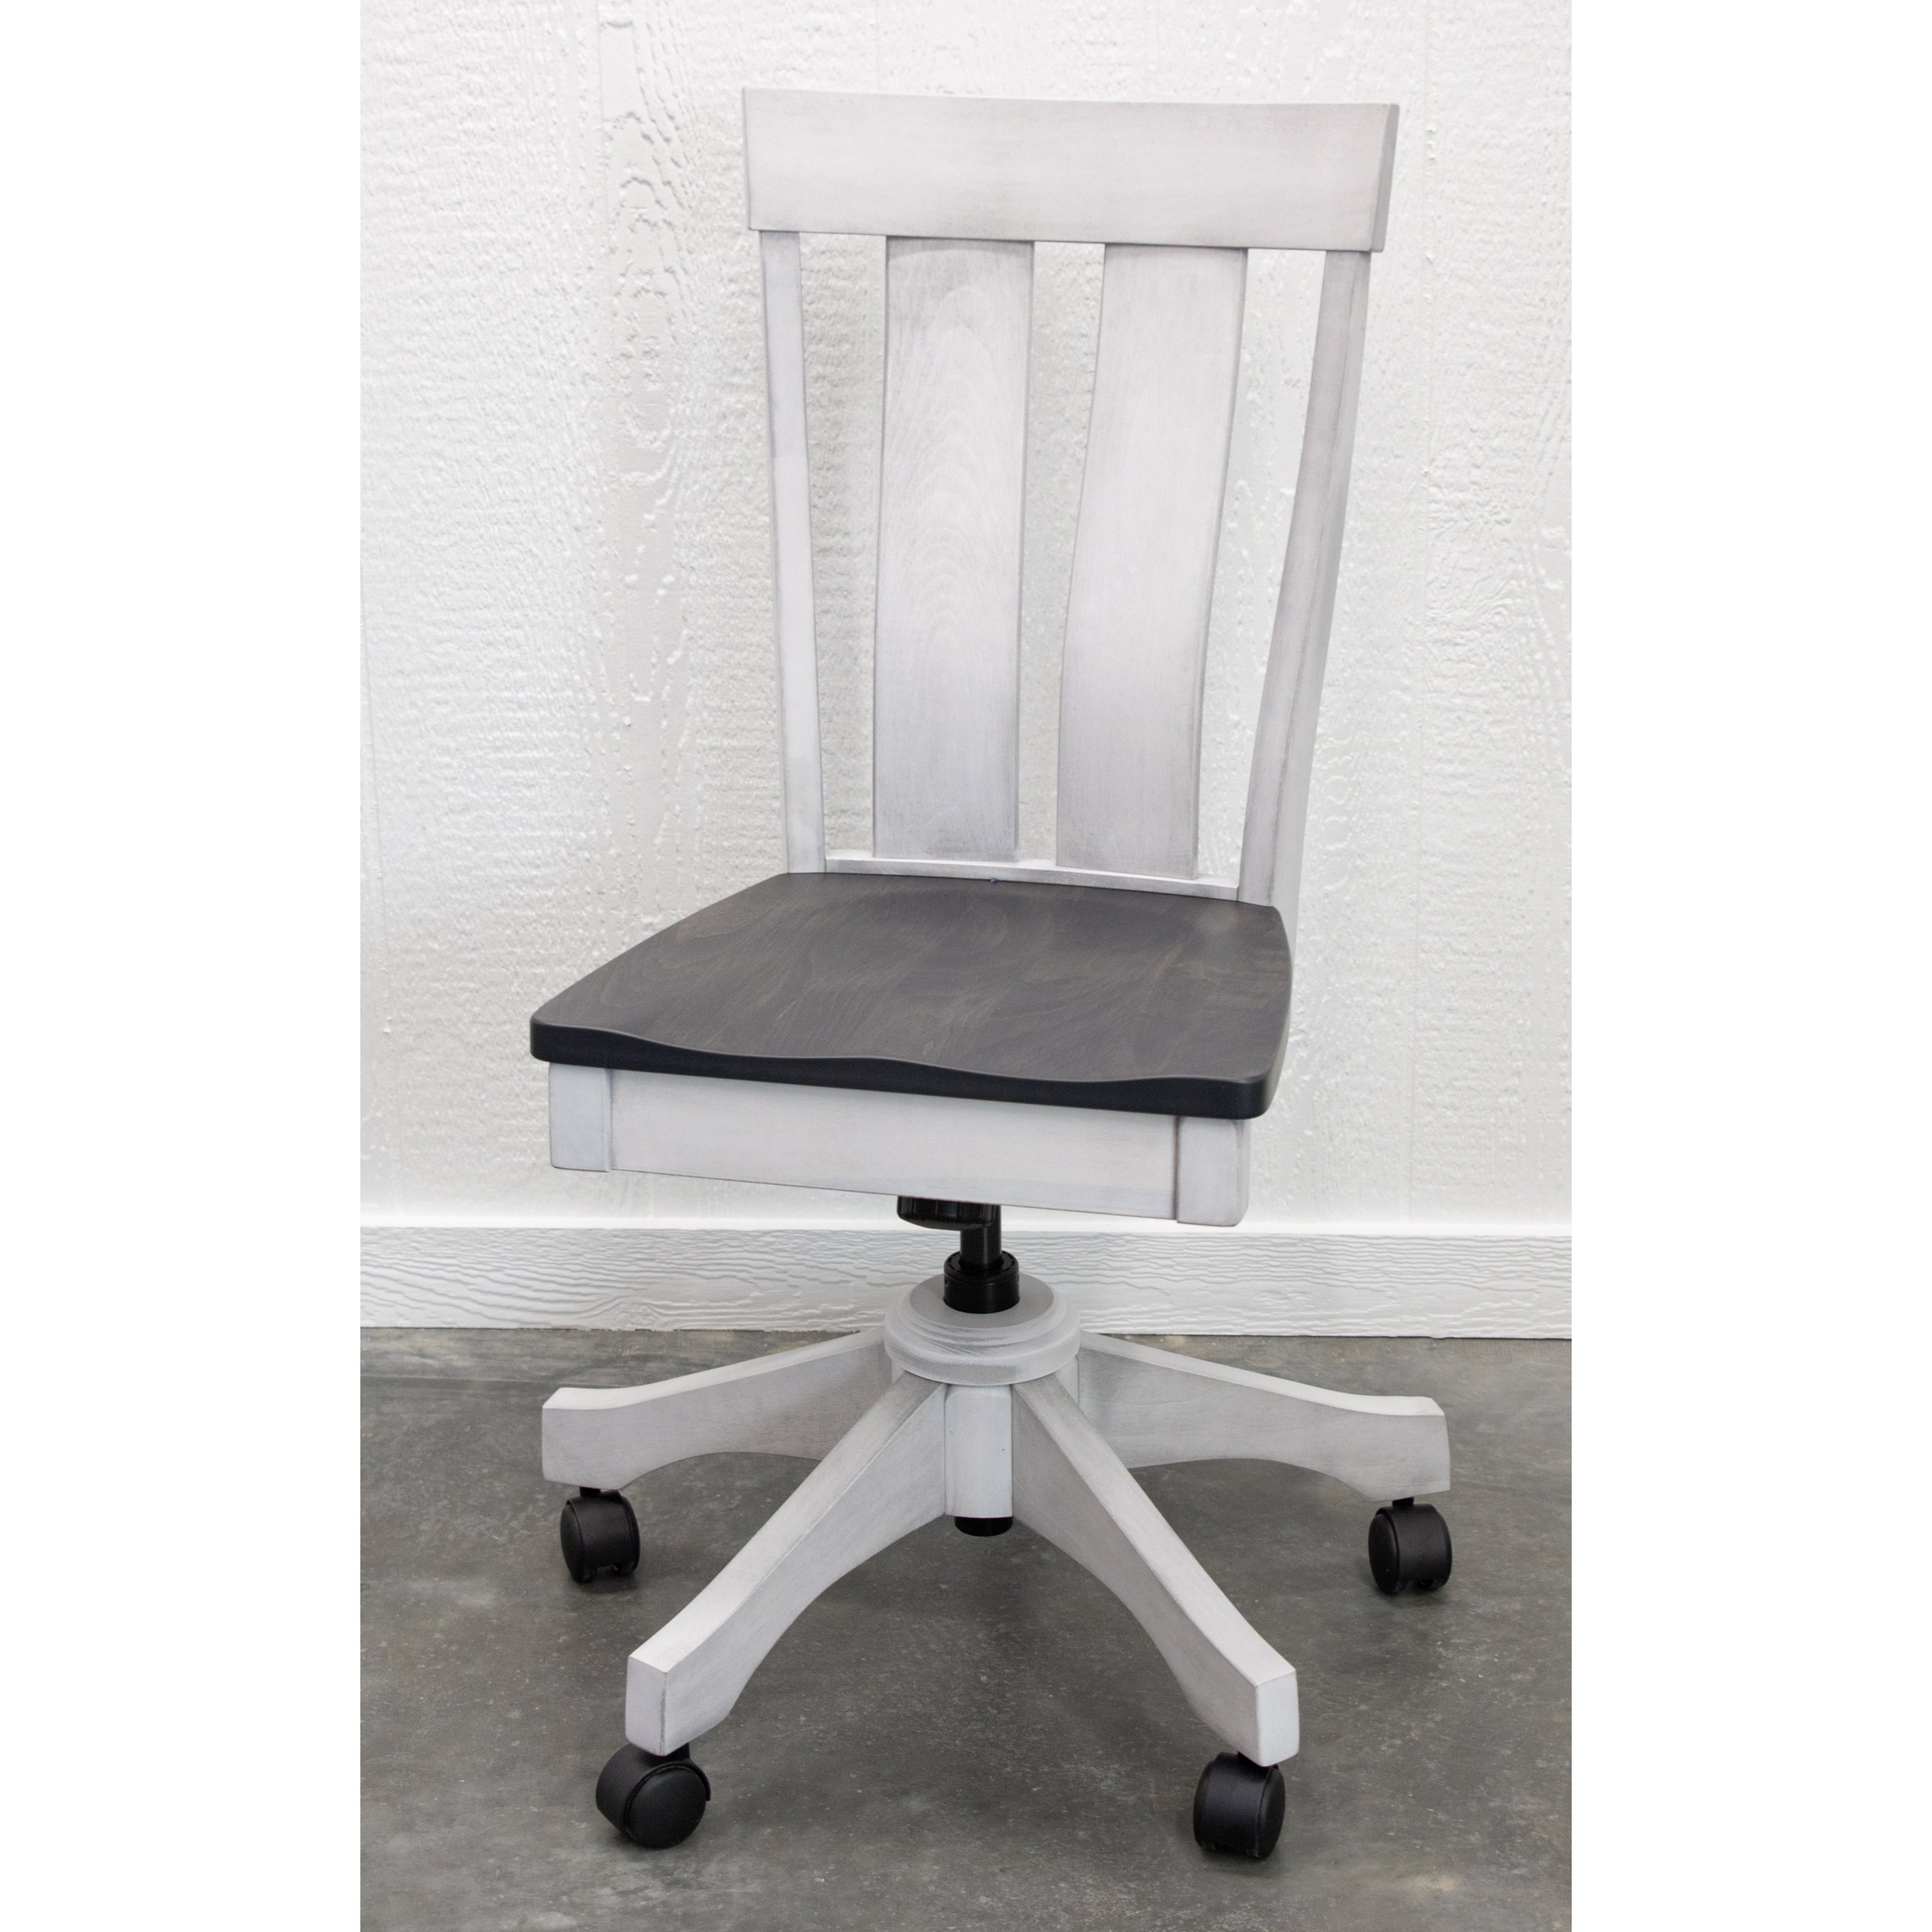 Kinglet Office Chair with Wood Seat